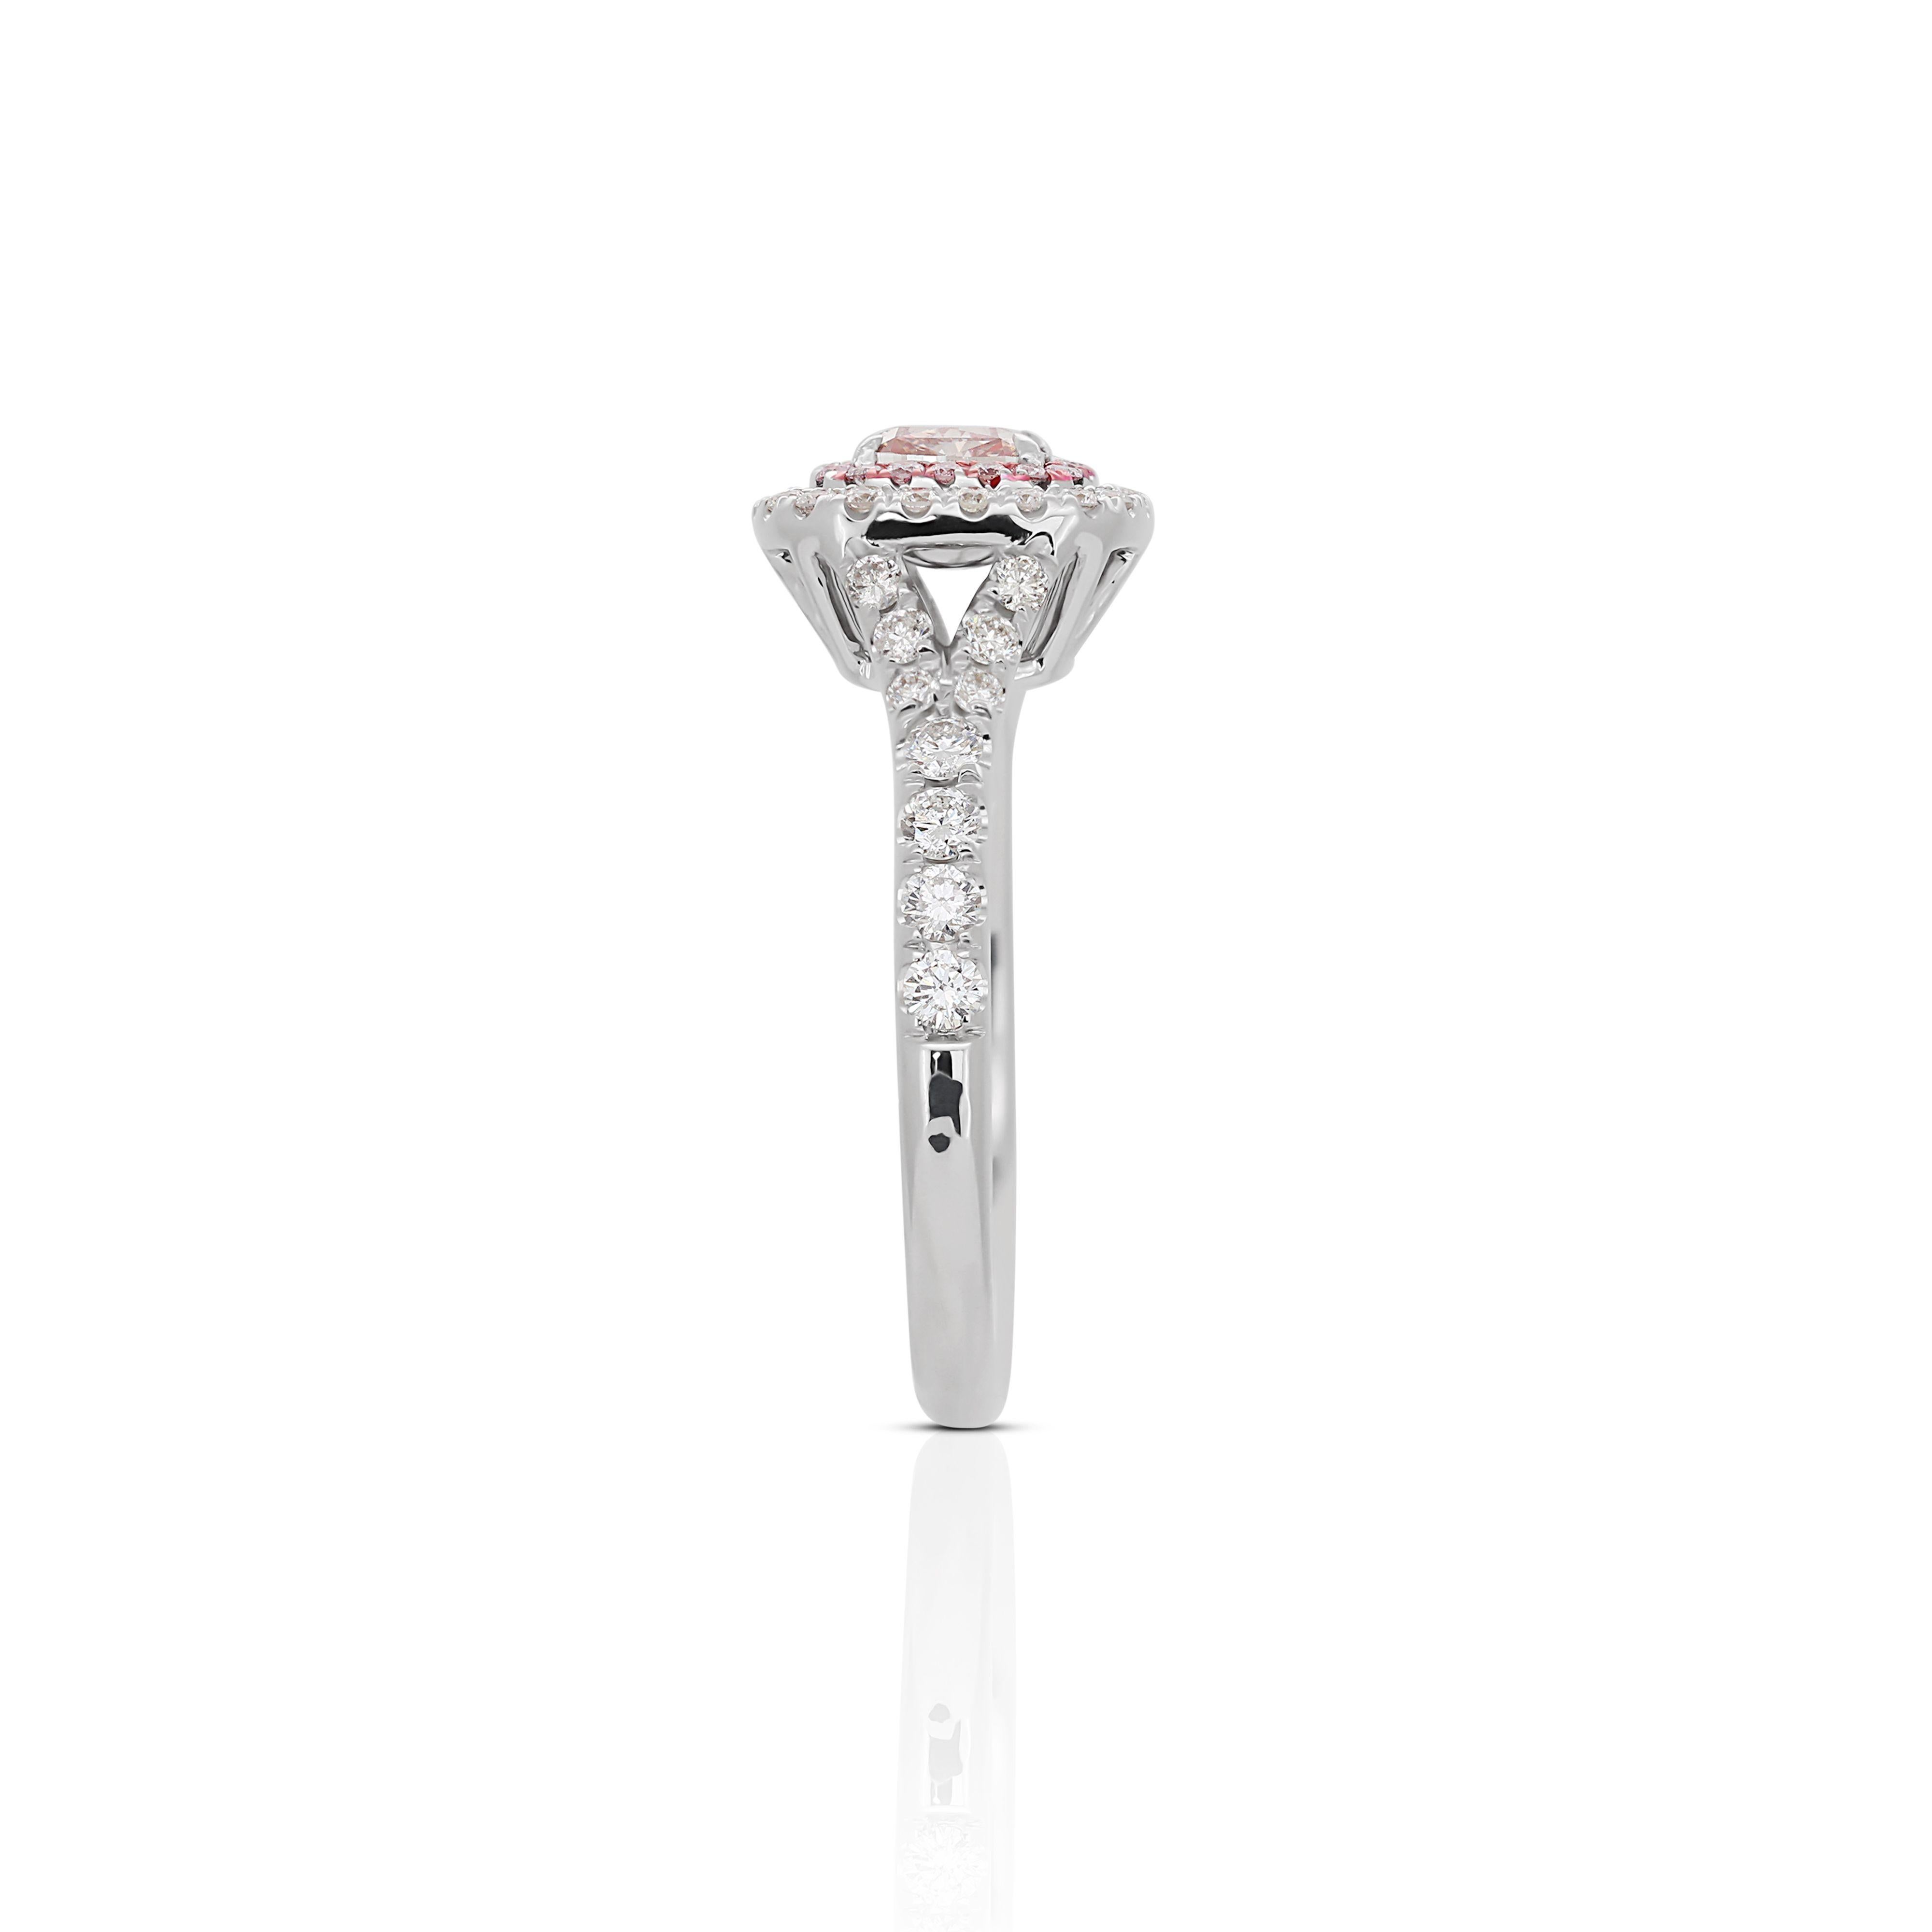 Exquisite 0.79ct Diamond Halo Ring in 18K White Gold In New Condition For Sale In רמת גן, IL